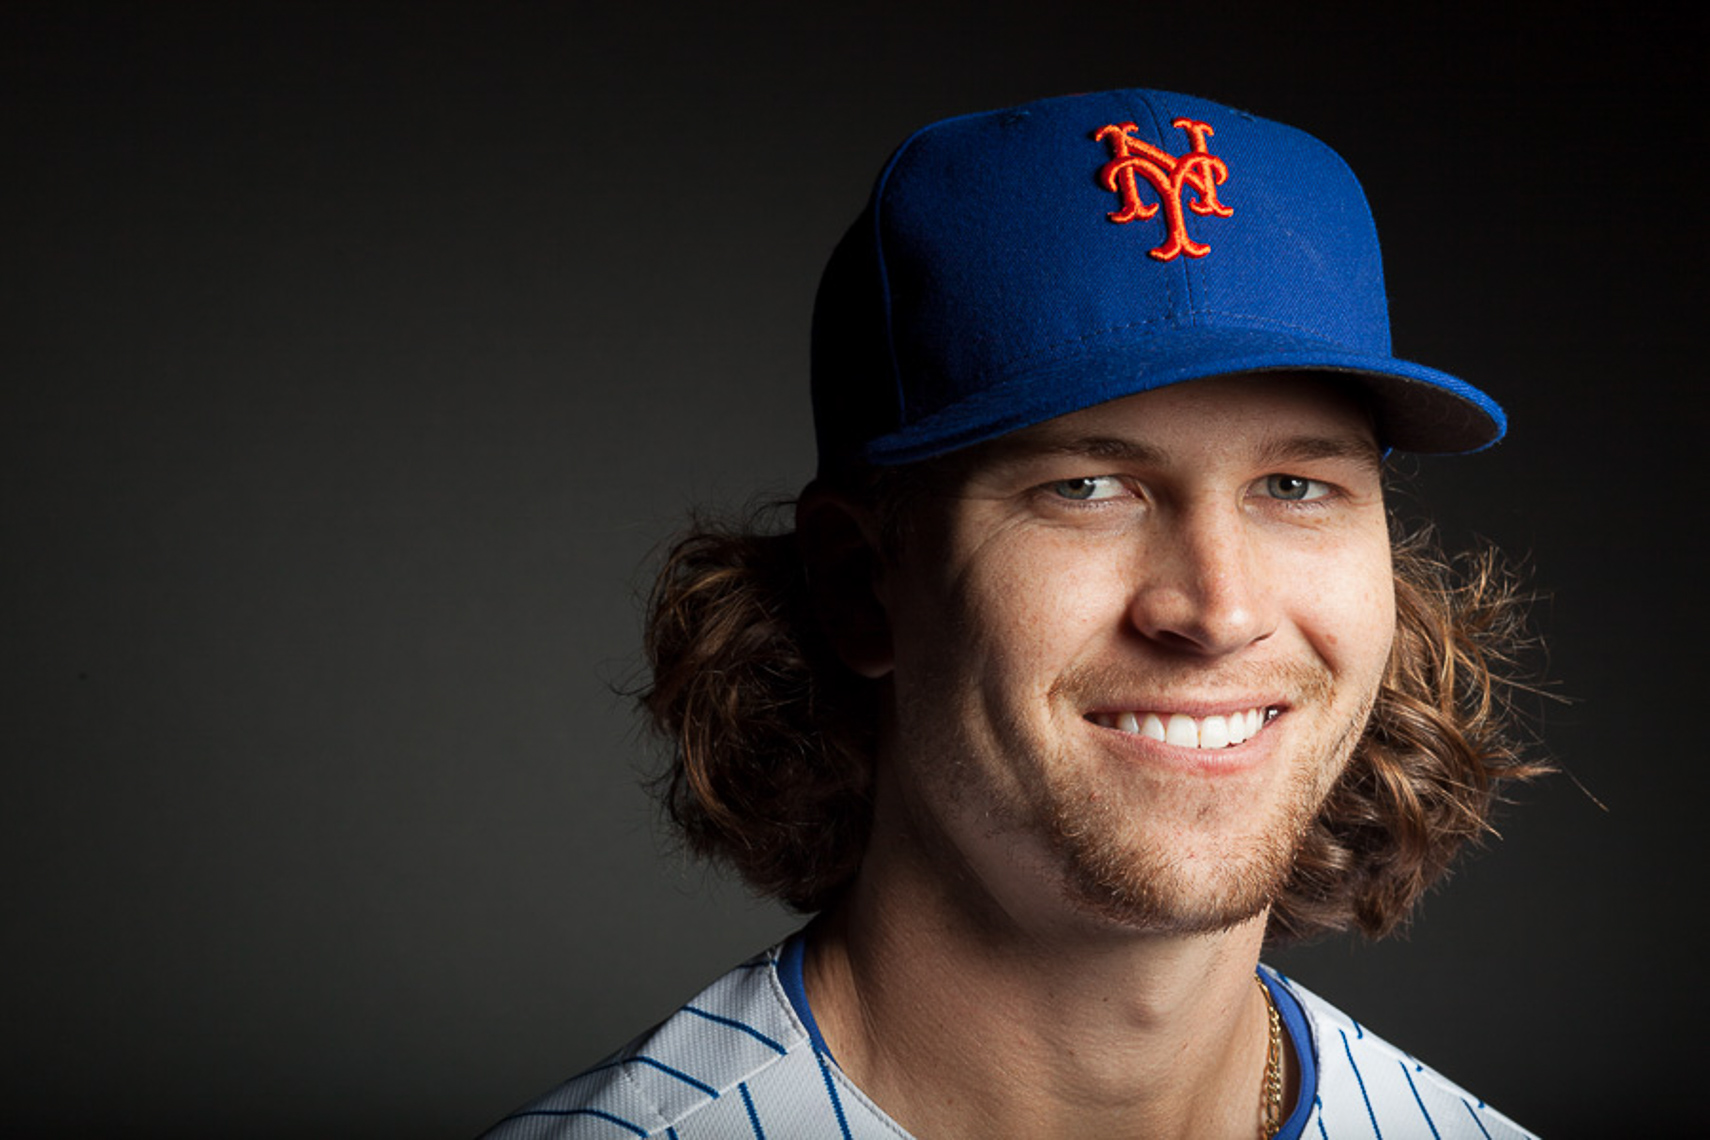 Jacob DeGrom by Jane Shauck